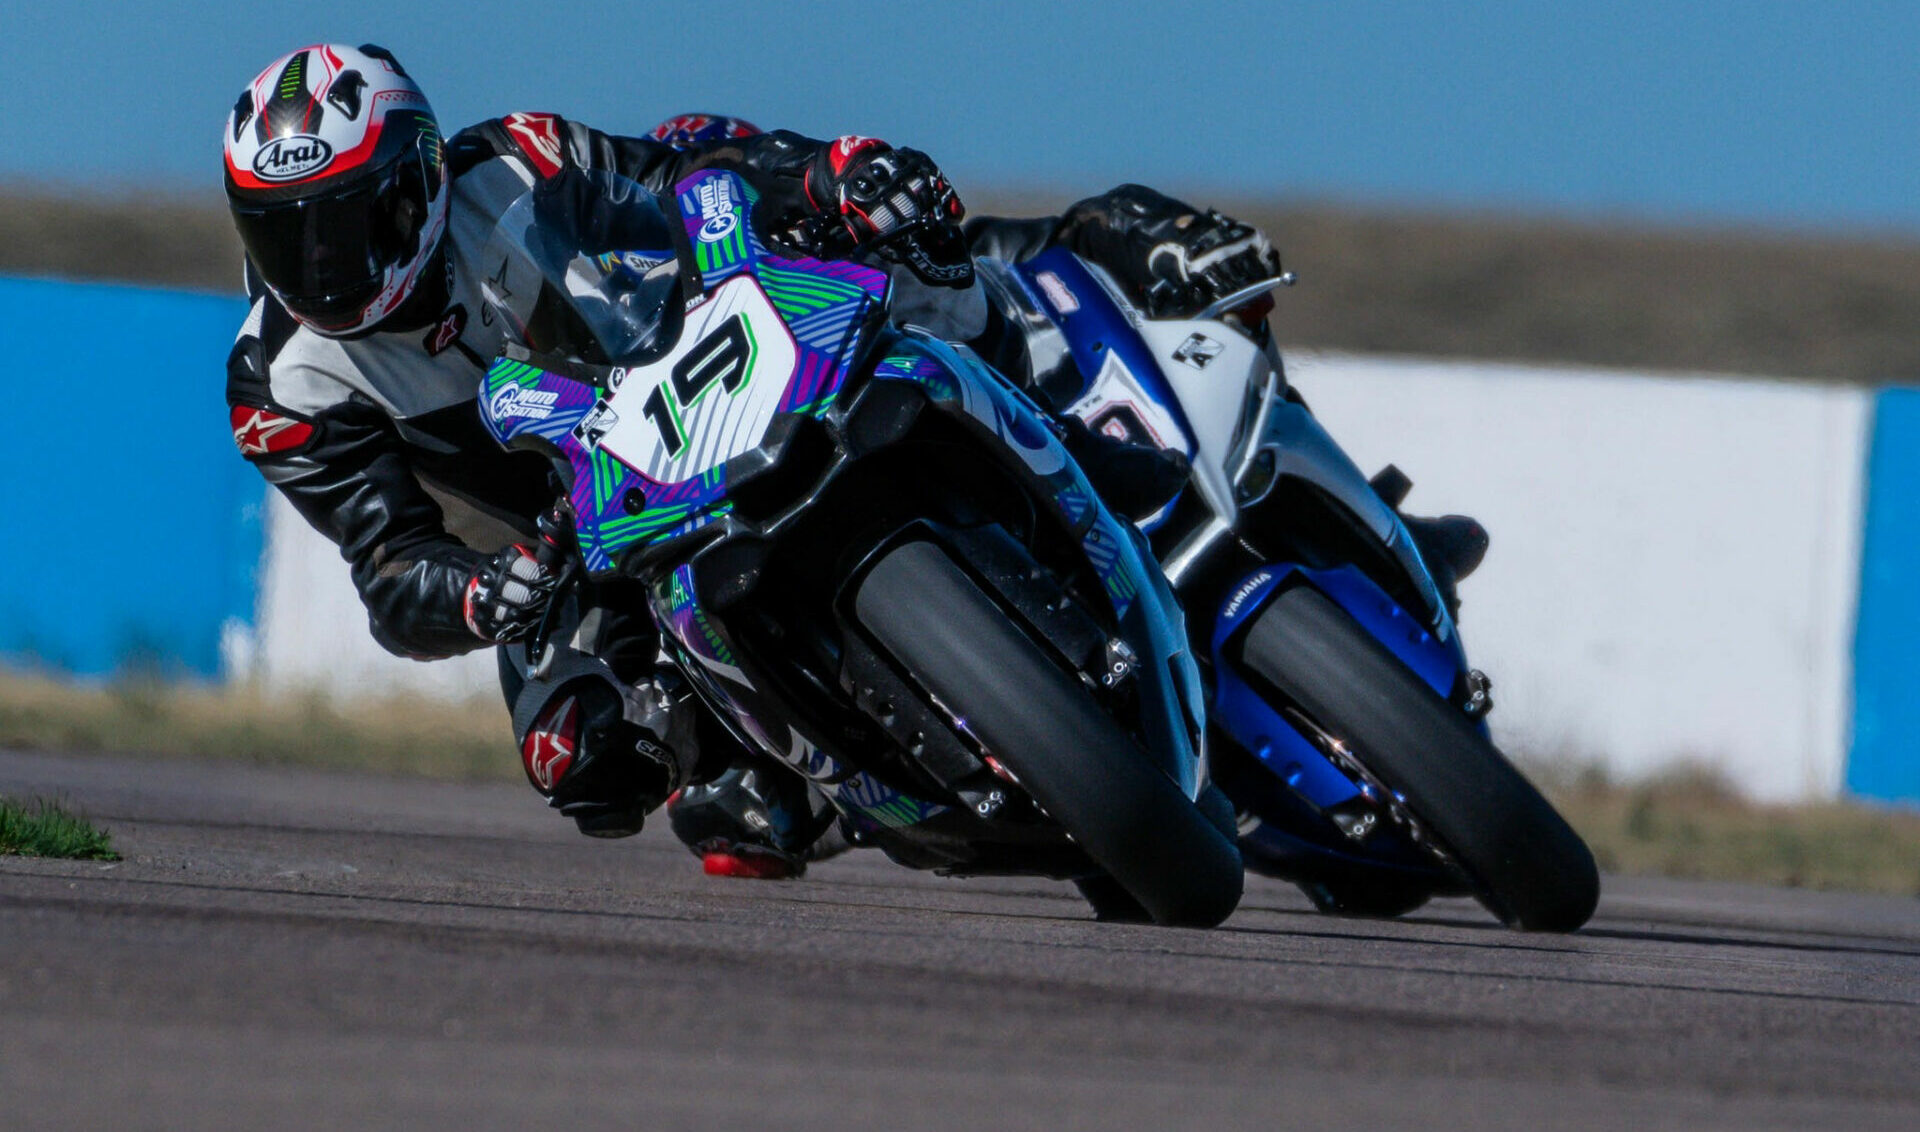 Dan Spurlock (19) leading Mike Applegate (79) at High Plains Raceway’s West Course during Round 6 of the 2022 MRA season. Photo by Kelly Vernell, courtesy MRA.